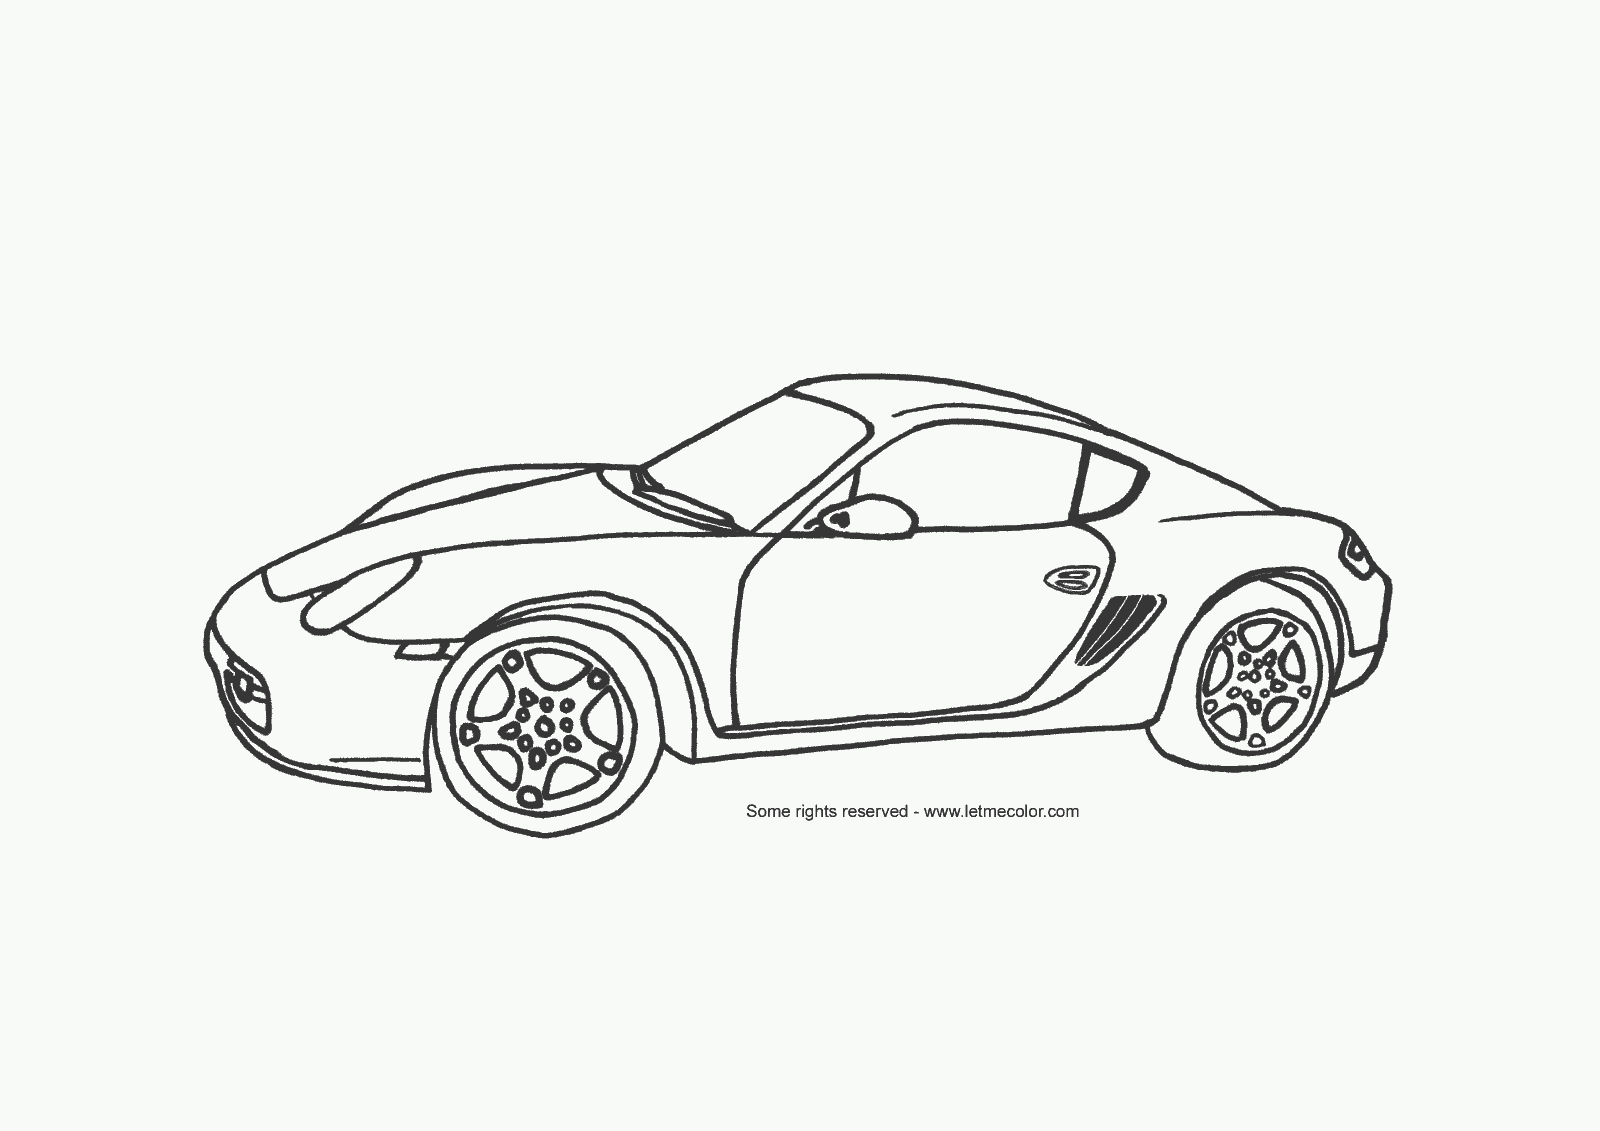 Porsche Coloring Pages | Only Coloring Pages - Coloring Home